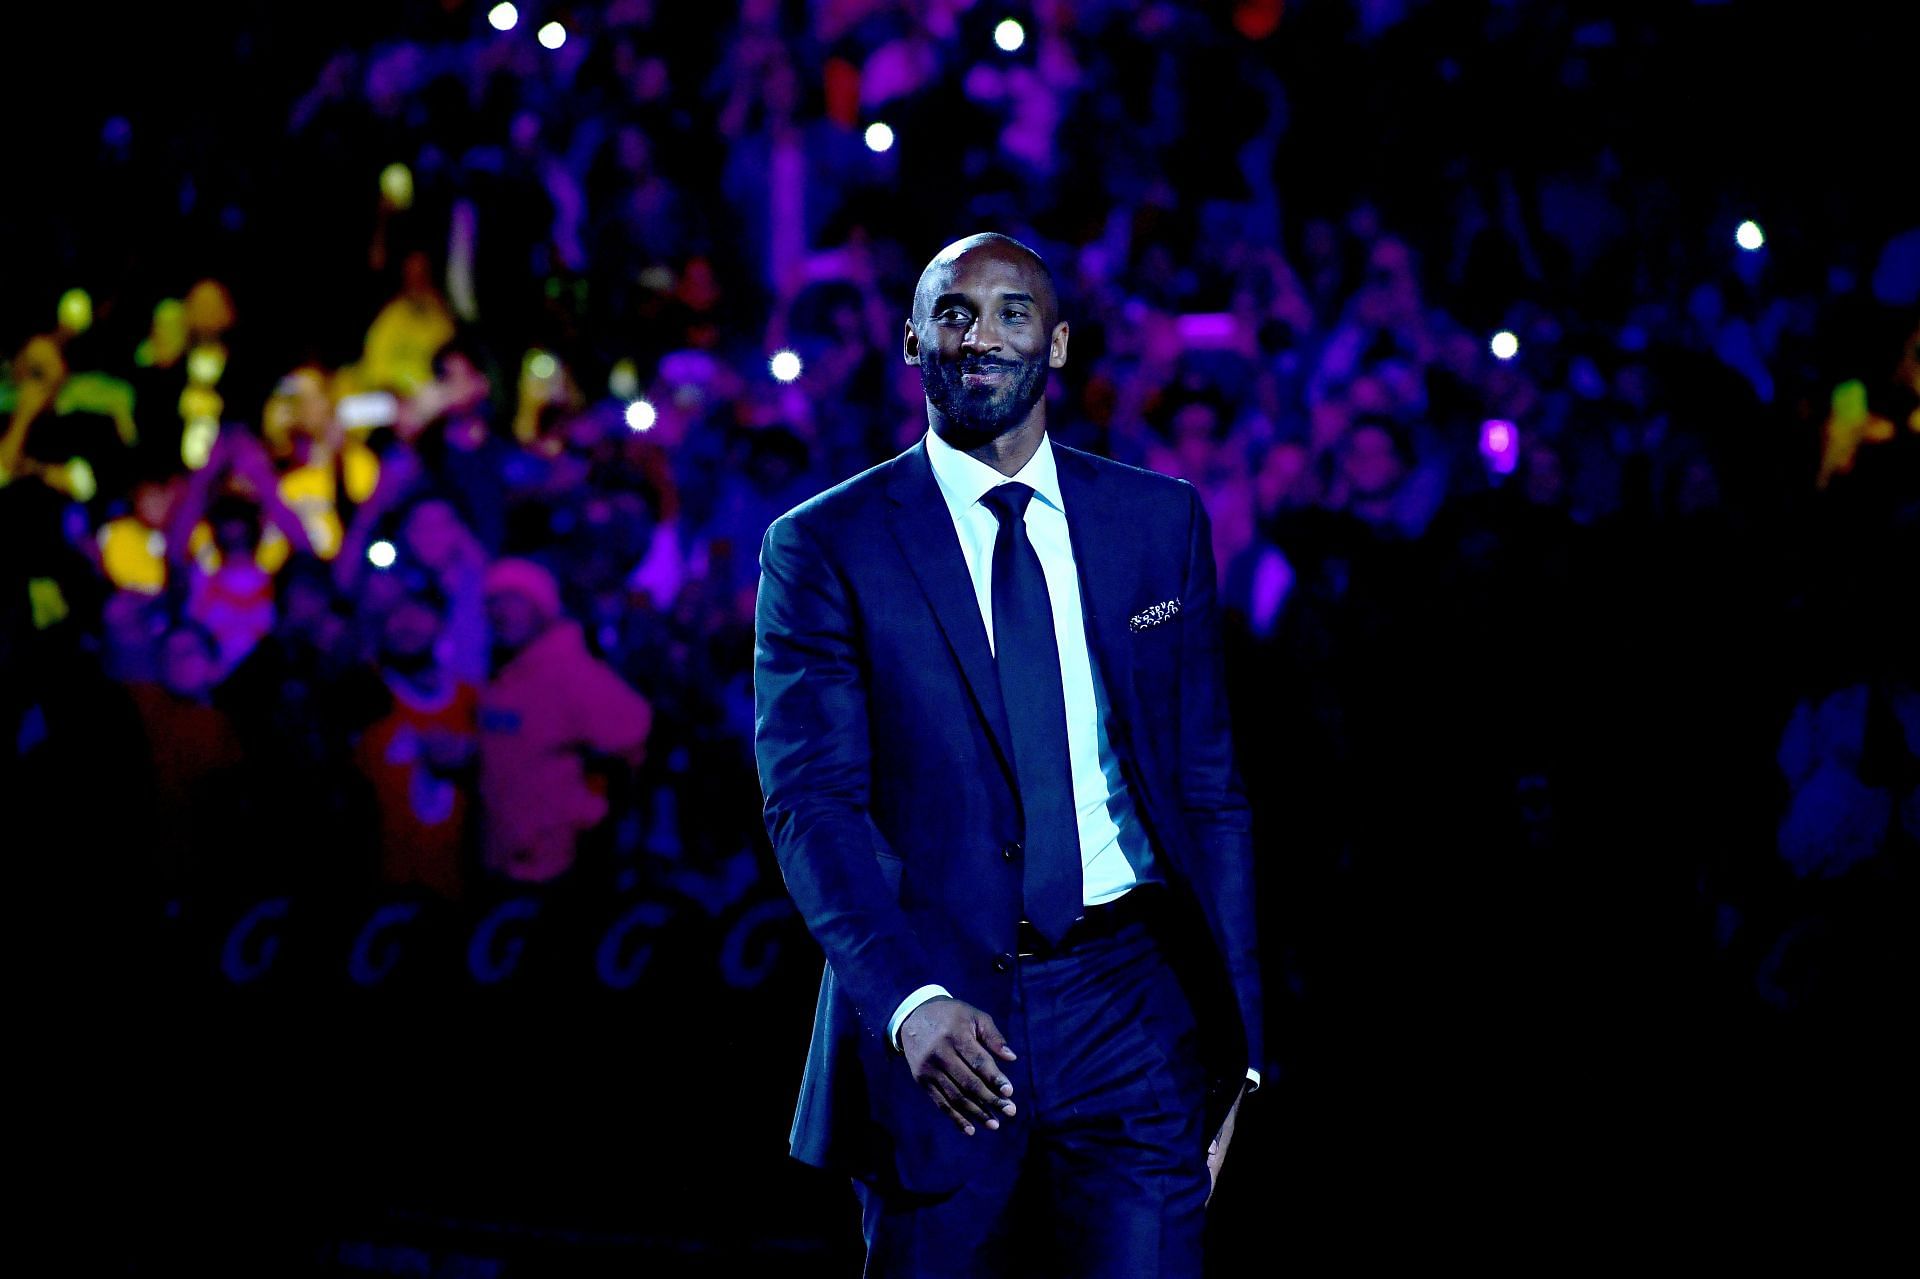 LA Lakers legand Kobe Bryant on the night his jersey was retired